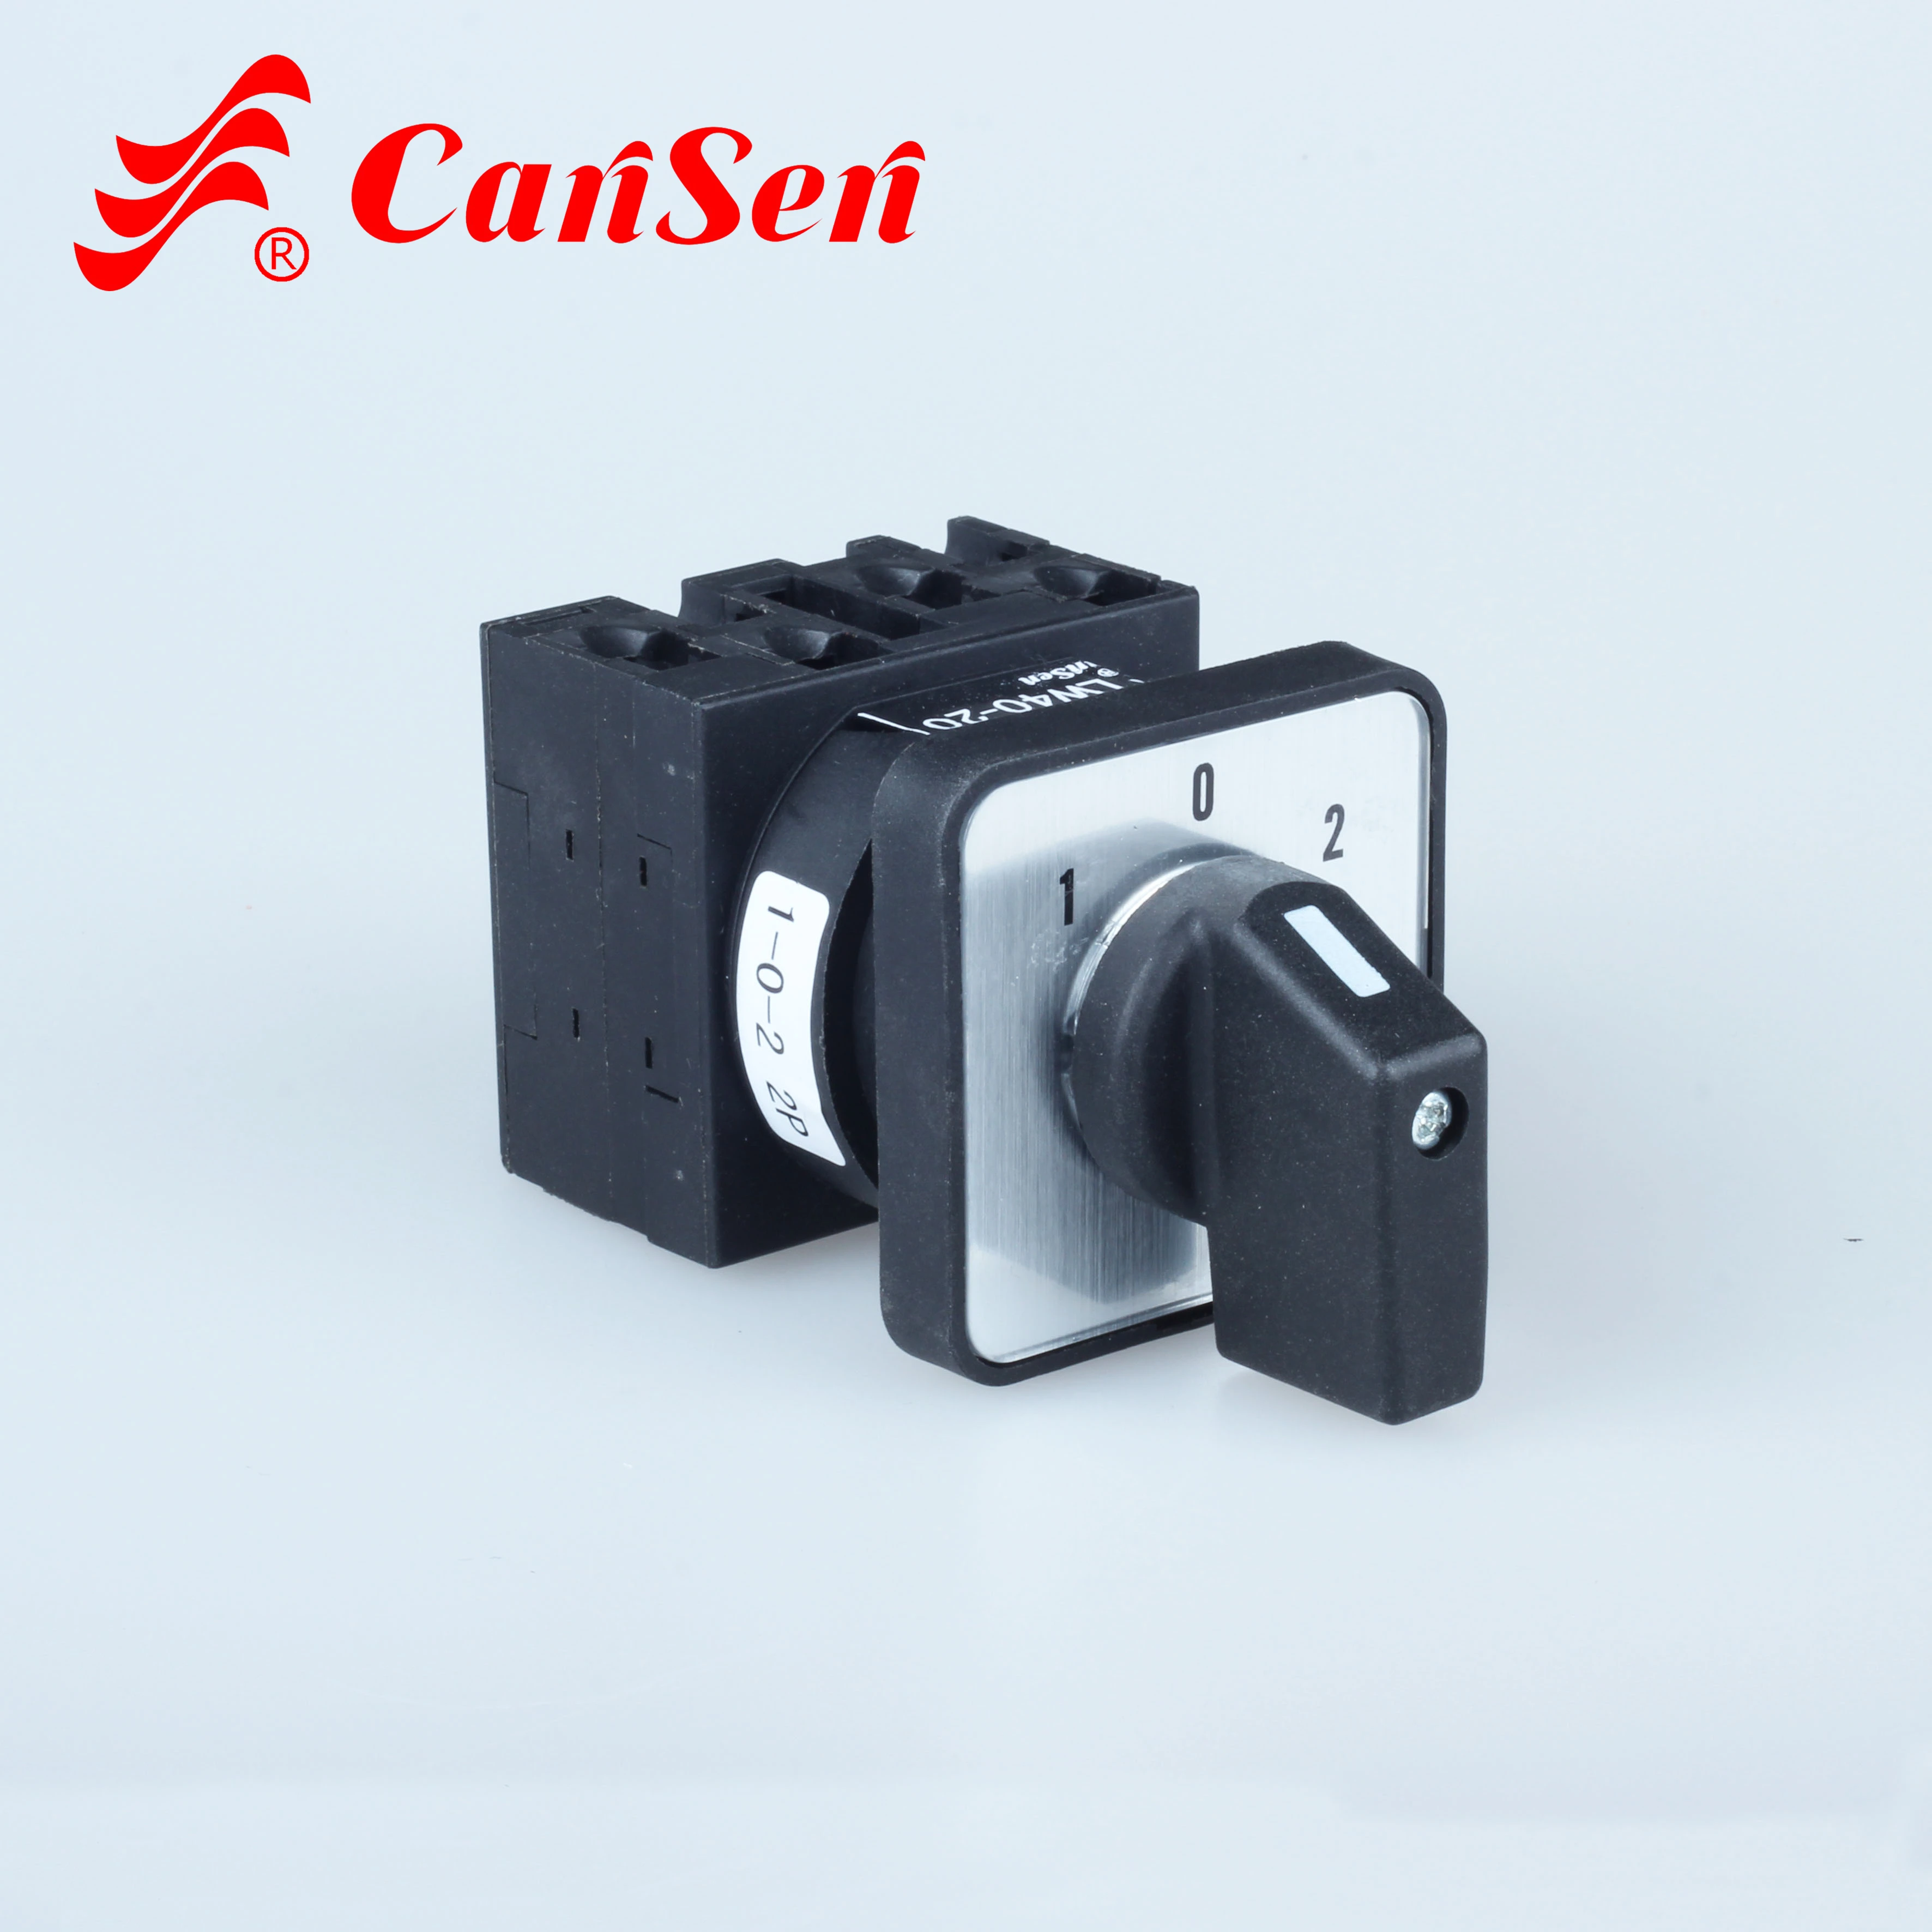 
Cansen LW40 20 1 0 2 2P CE certificate universal changeover rotary cam changeover switch  (1600153782957)